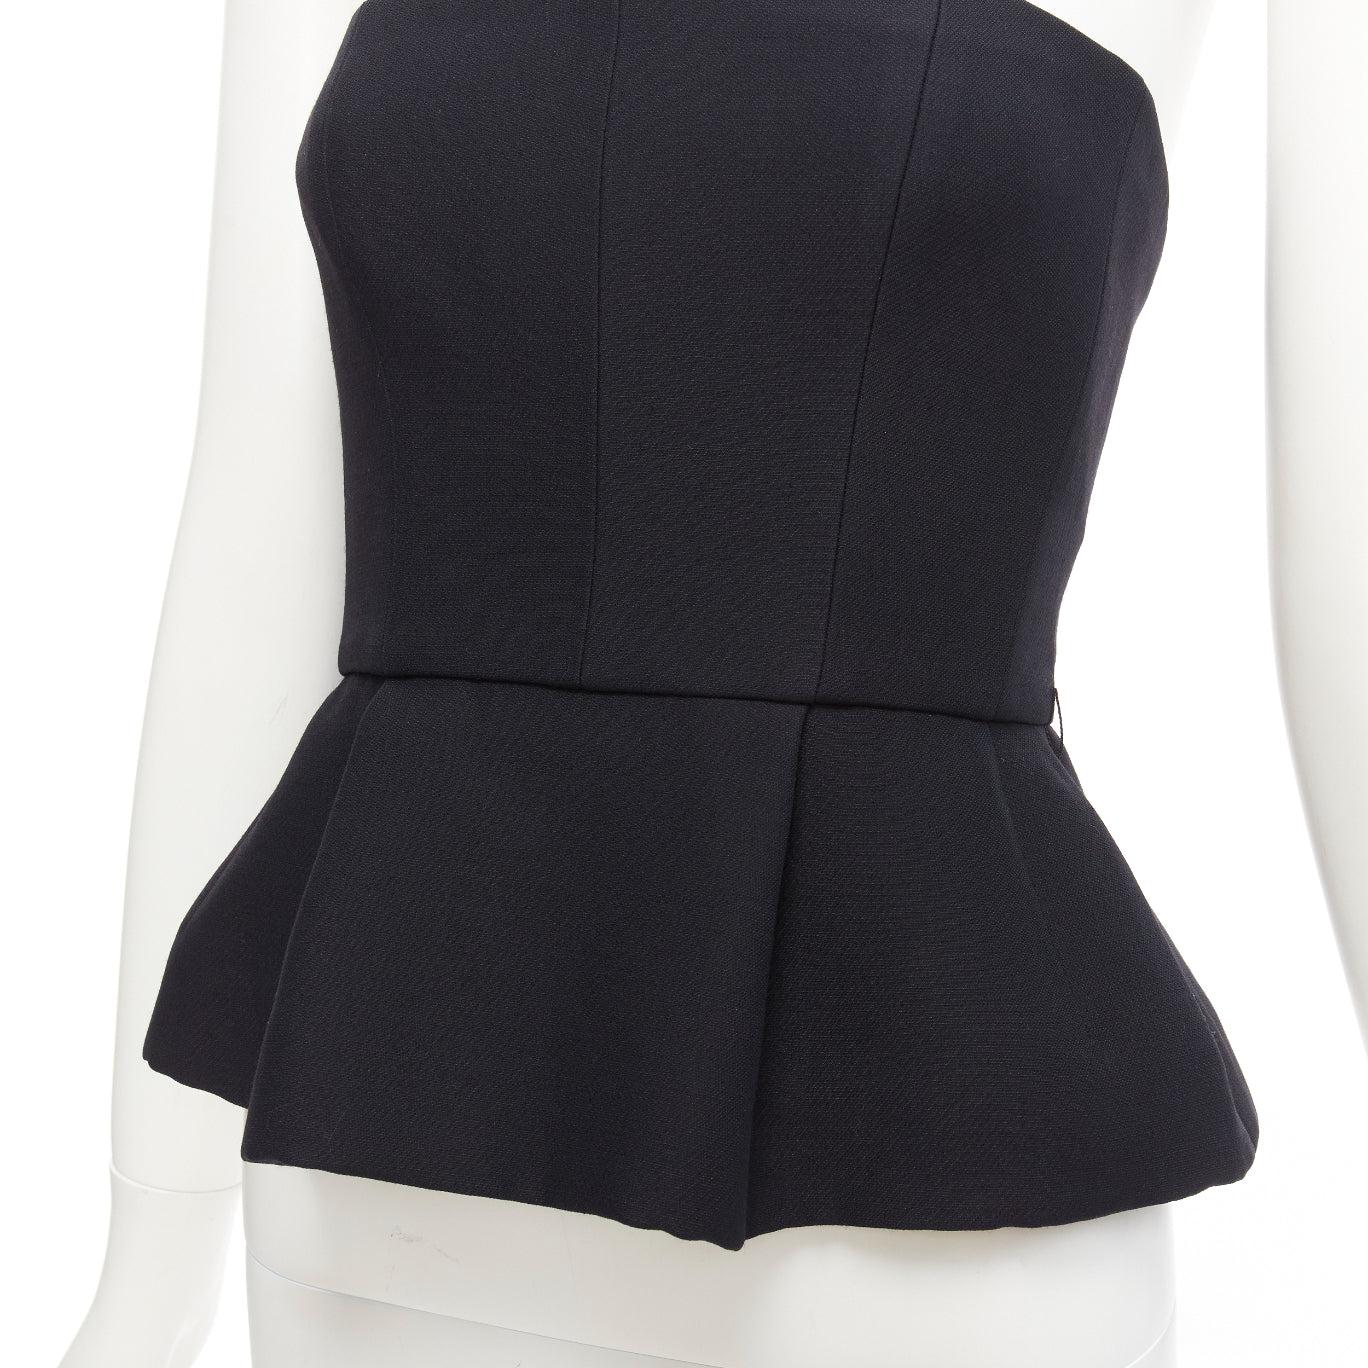 CHRISTIAN DIOR black wool silk minimal boned corset peplum bustier top FR34 XS
Reference: AAWC/A00737
Brand: Dior
Material: Wool, Silk
Color: Black
Pattern: Solid
Closure: Zip
Lining: Black Silk
Extra Details: Boned with silk lining. Back zip